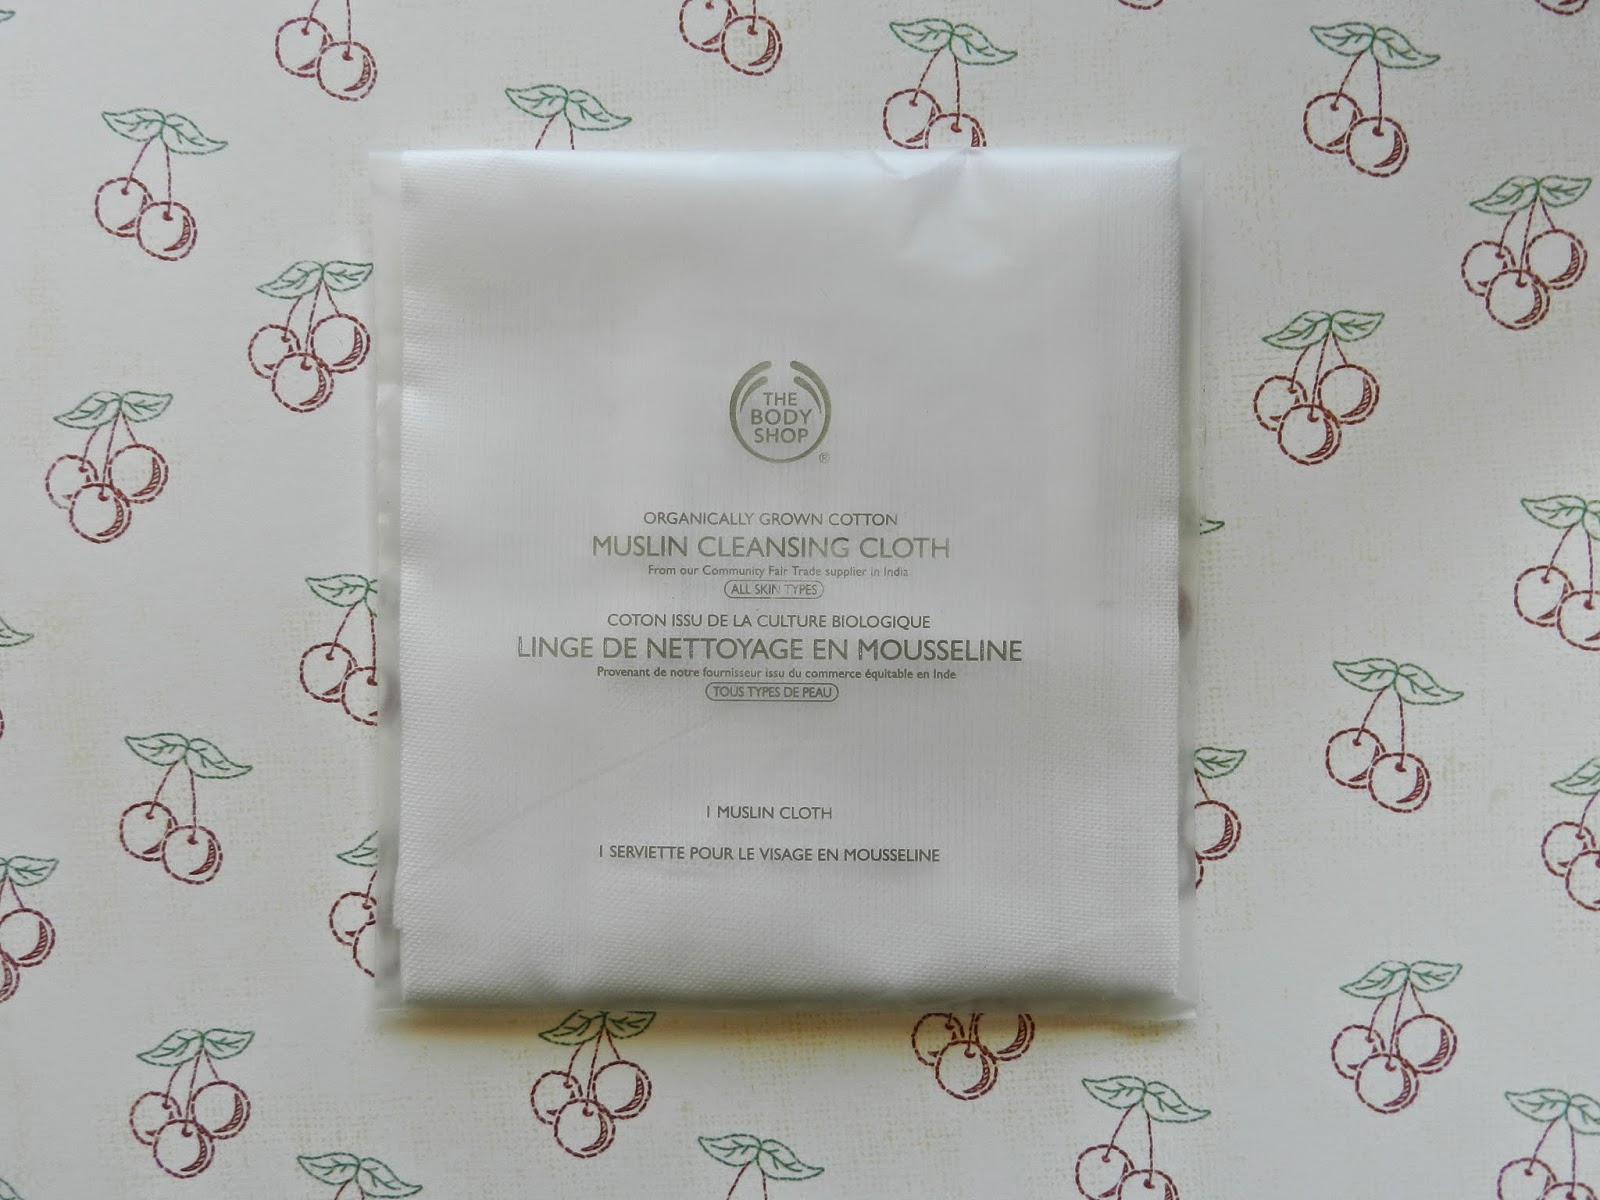 Muslin Cleansing Cloth - The Body Shop Muslin Cleansing Cloth